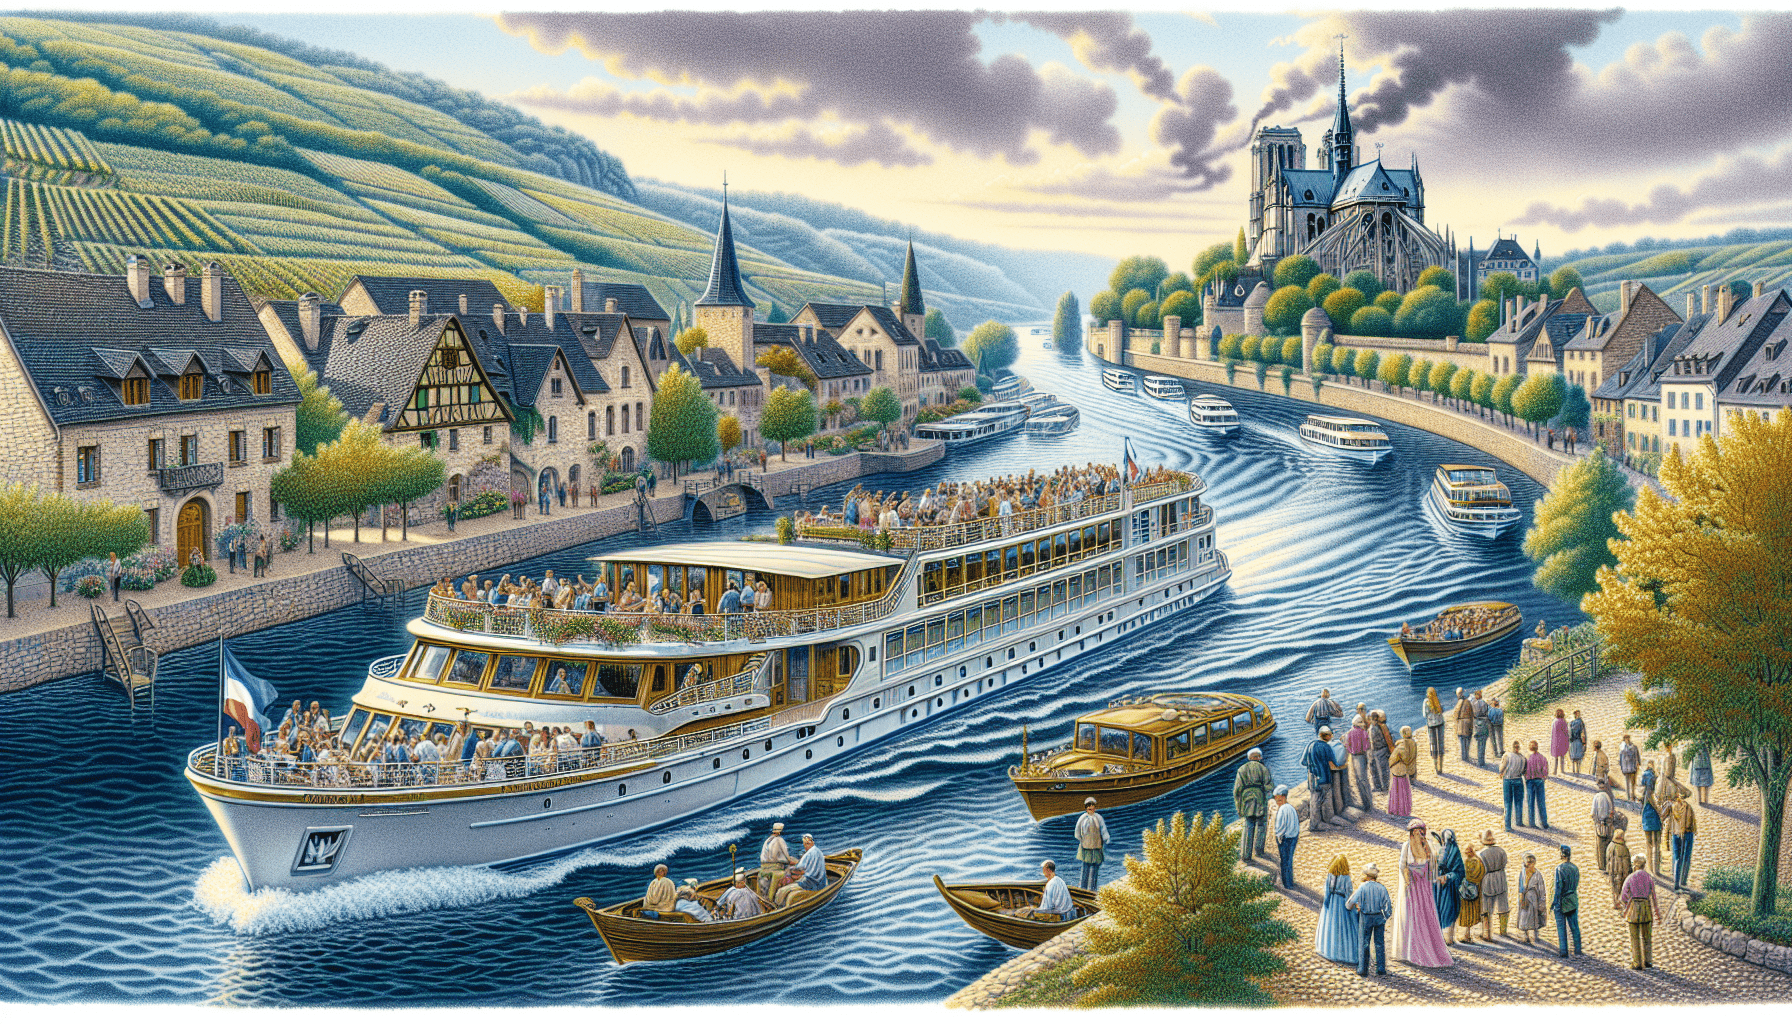 What Is The Average Cost Of A European River Cruise?